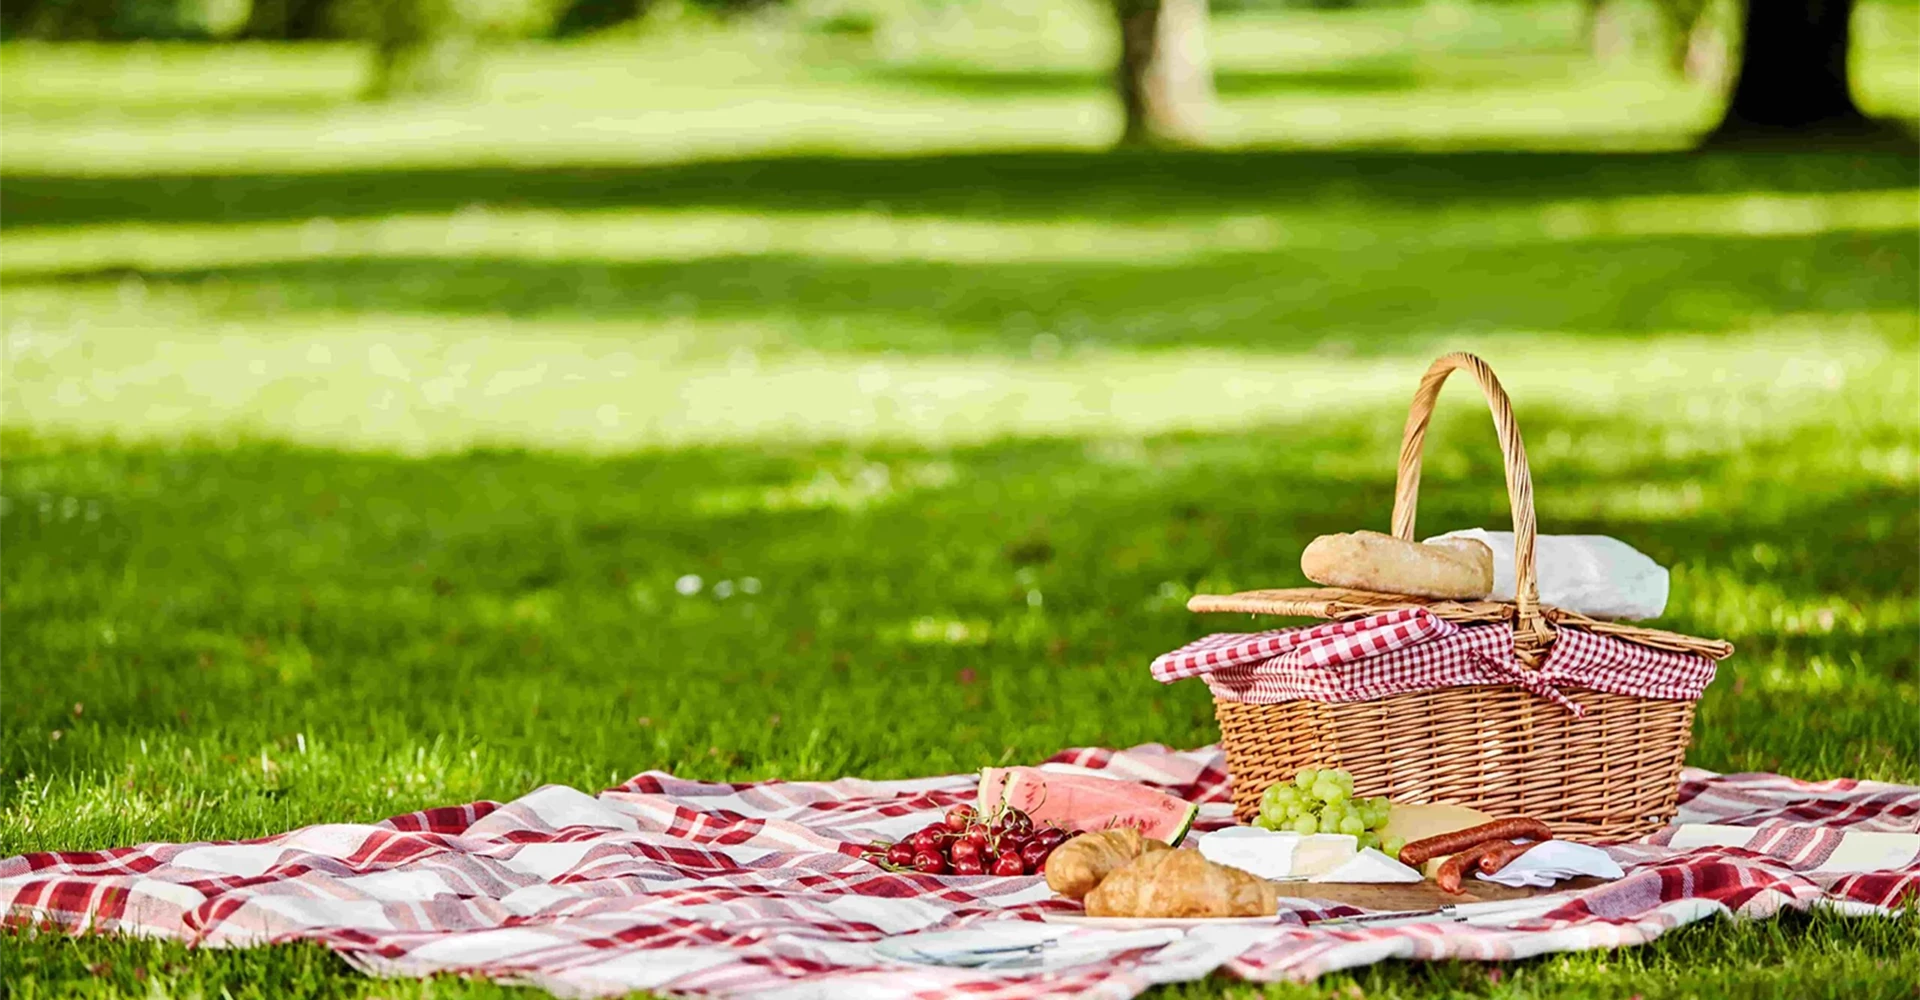 Gourmet Picnic in the middle of Nature